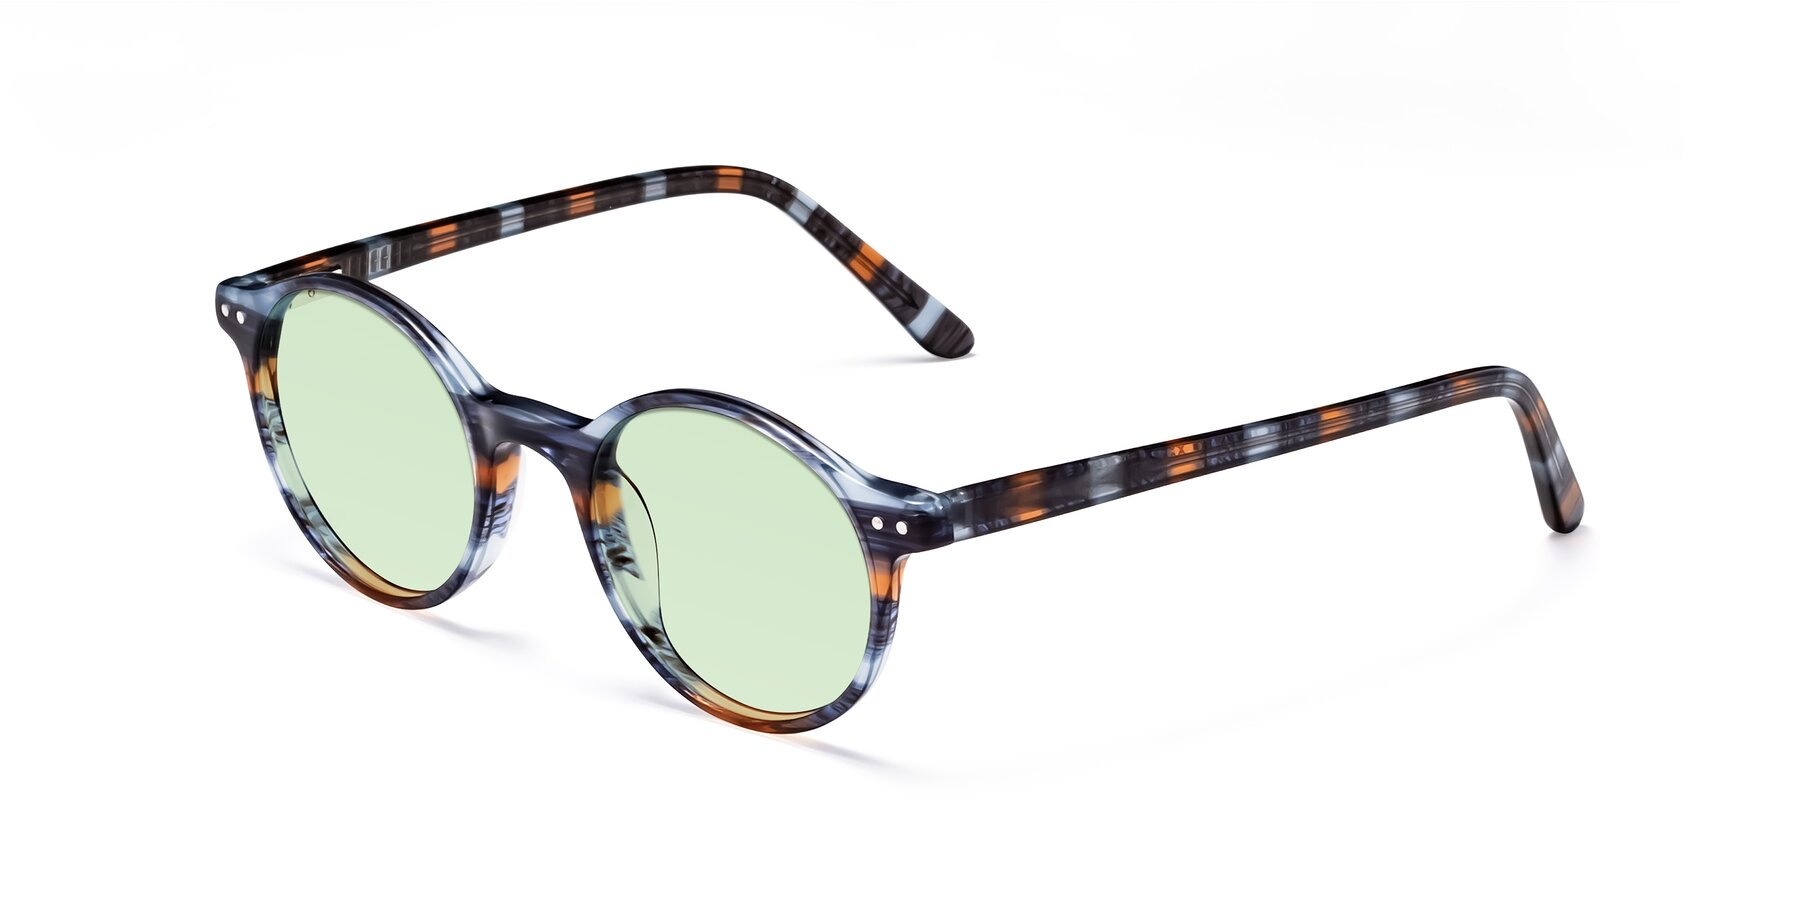 Angle of Jardi in Stripe Blue Brown with Light Green Tinted Lenses